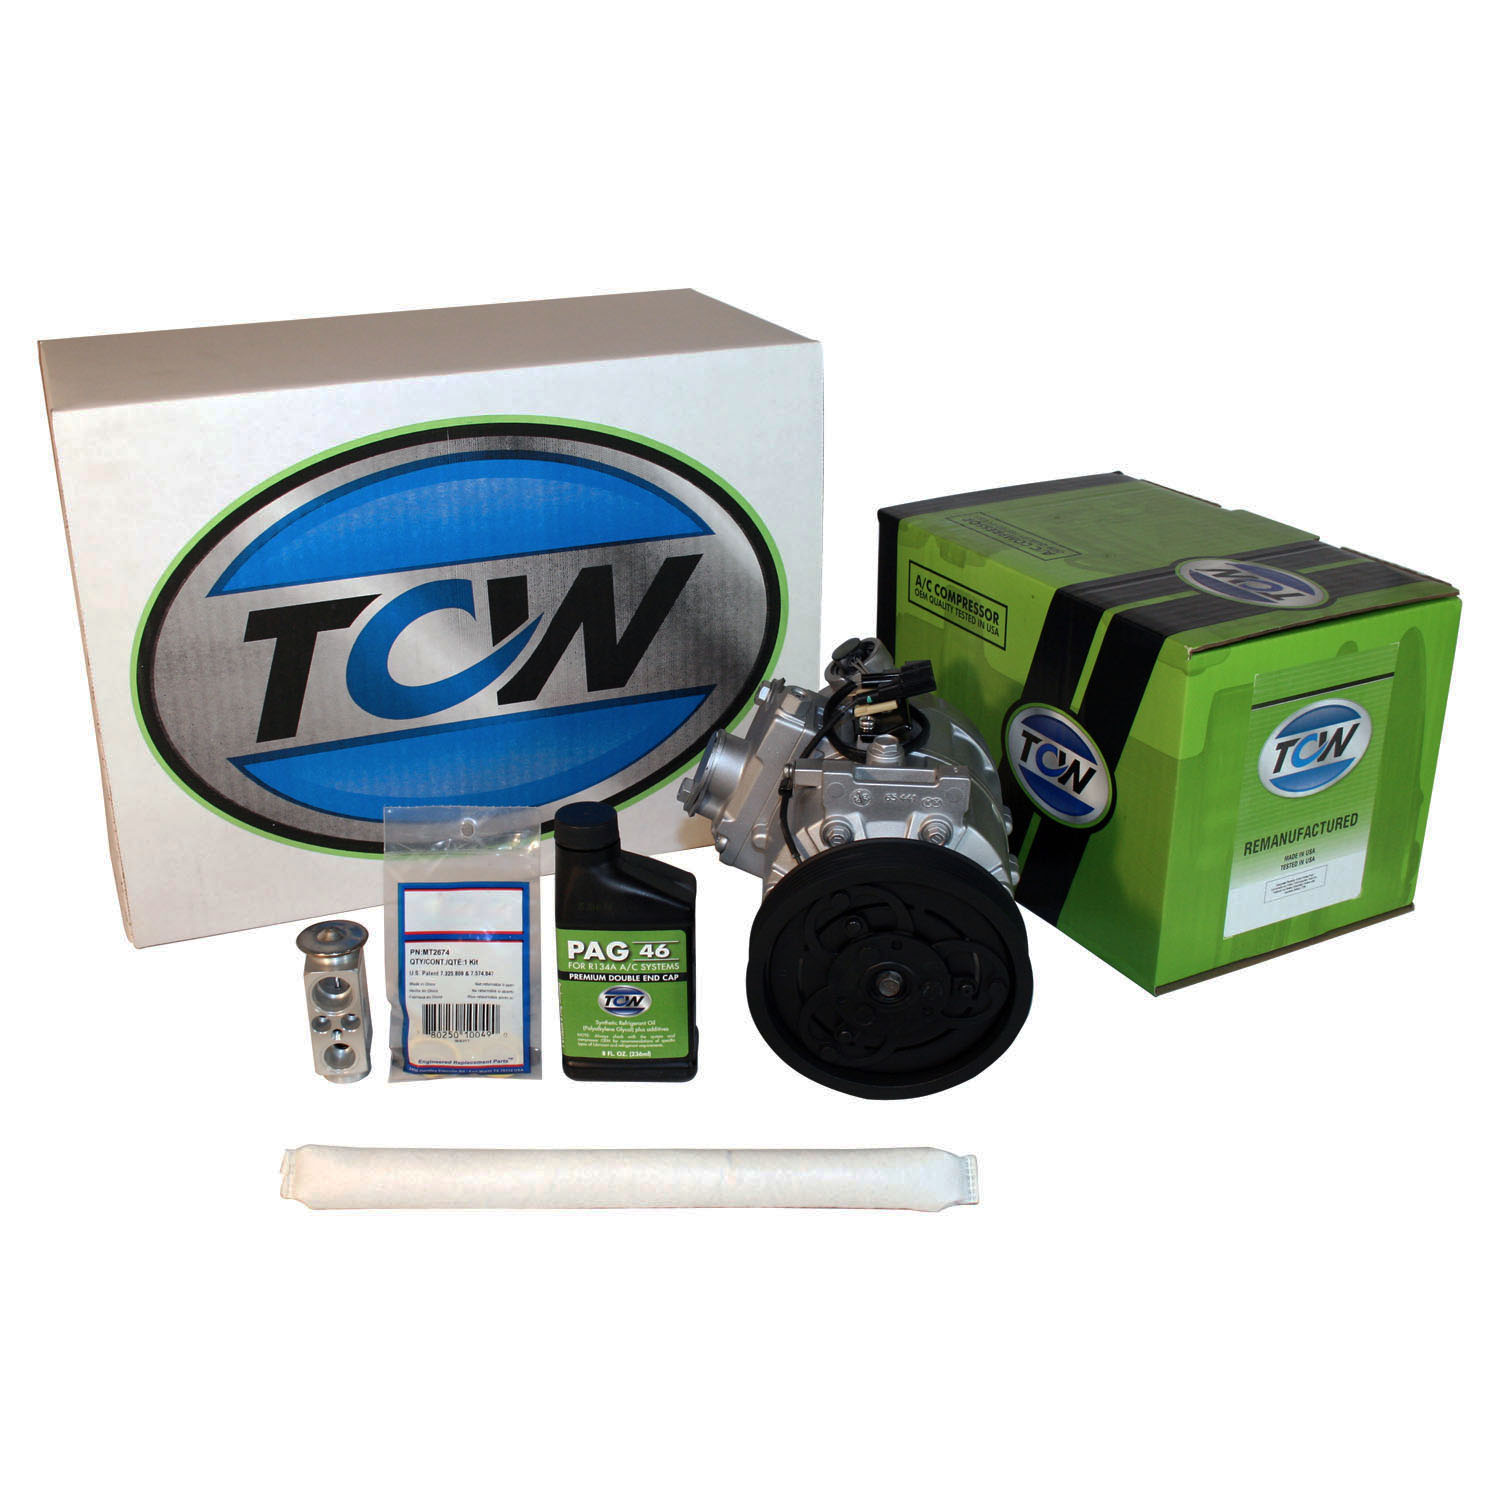 TCW Vehicle A/C Kit K1000481R Remanufactured